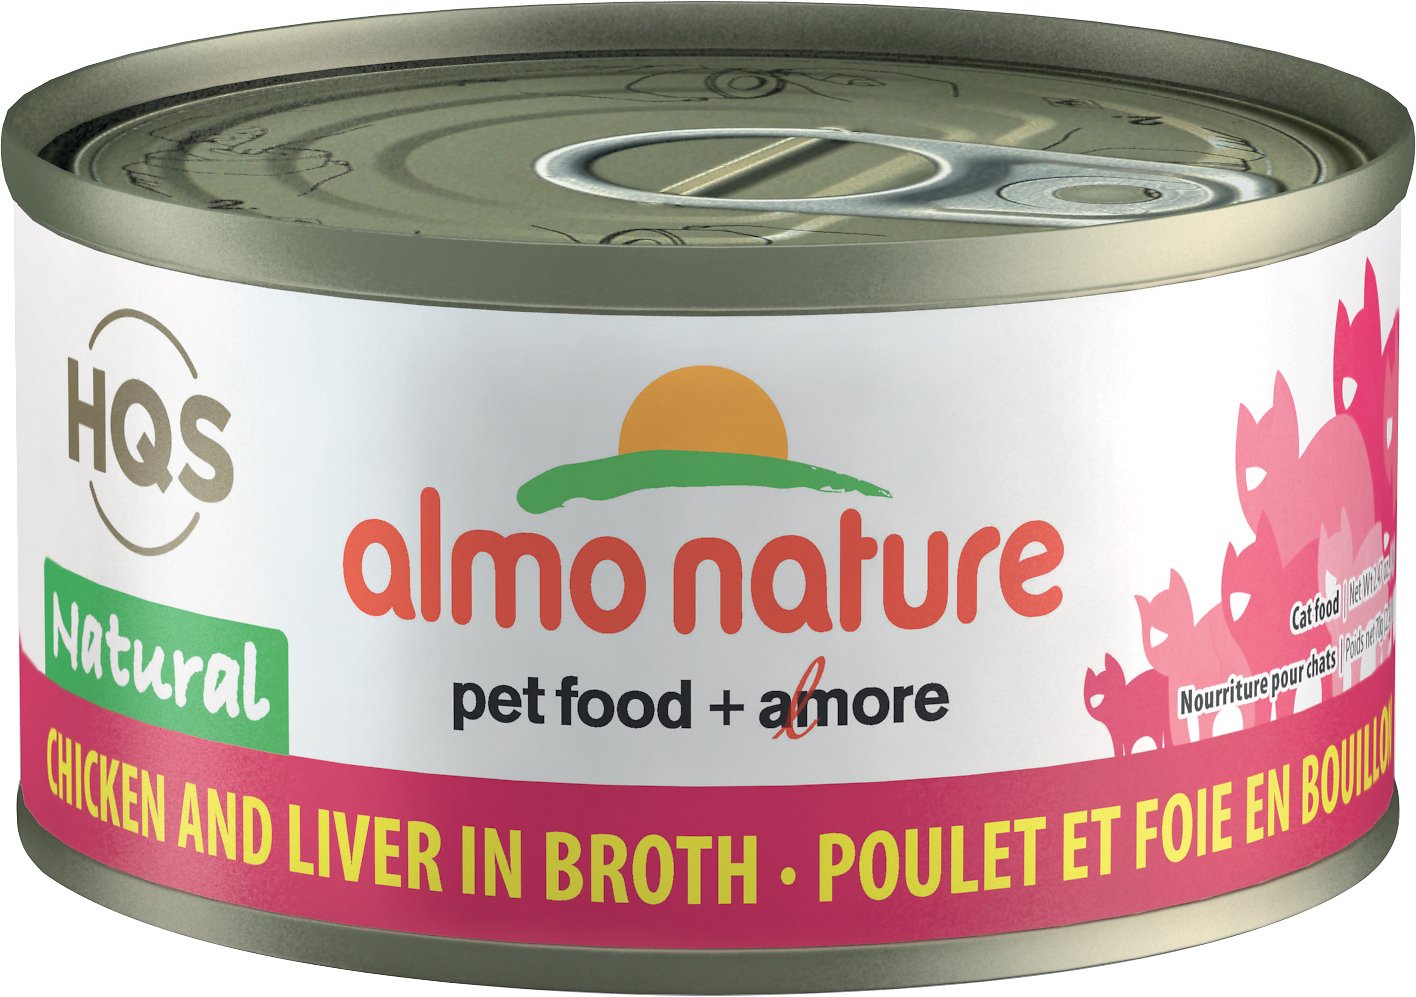 Almo Nature | Wet Cat Food | ARMOR THE POOCH